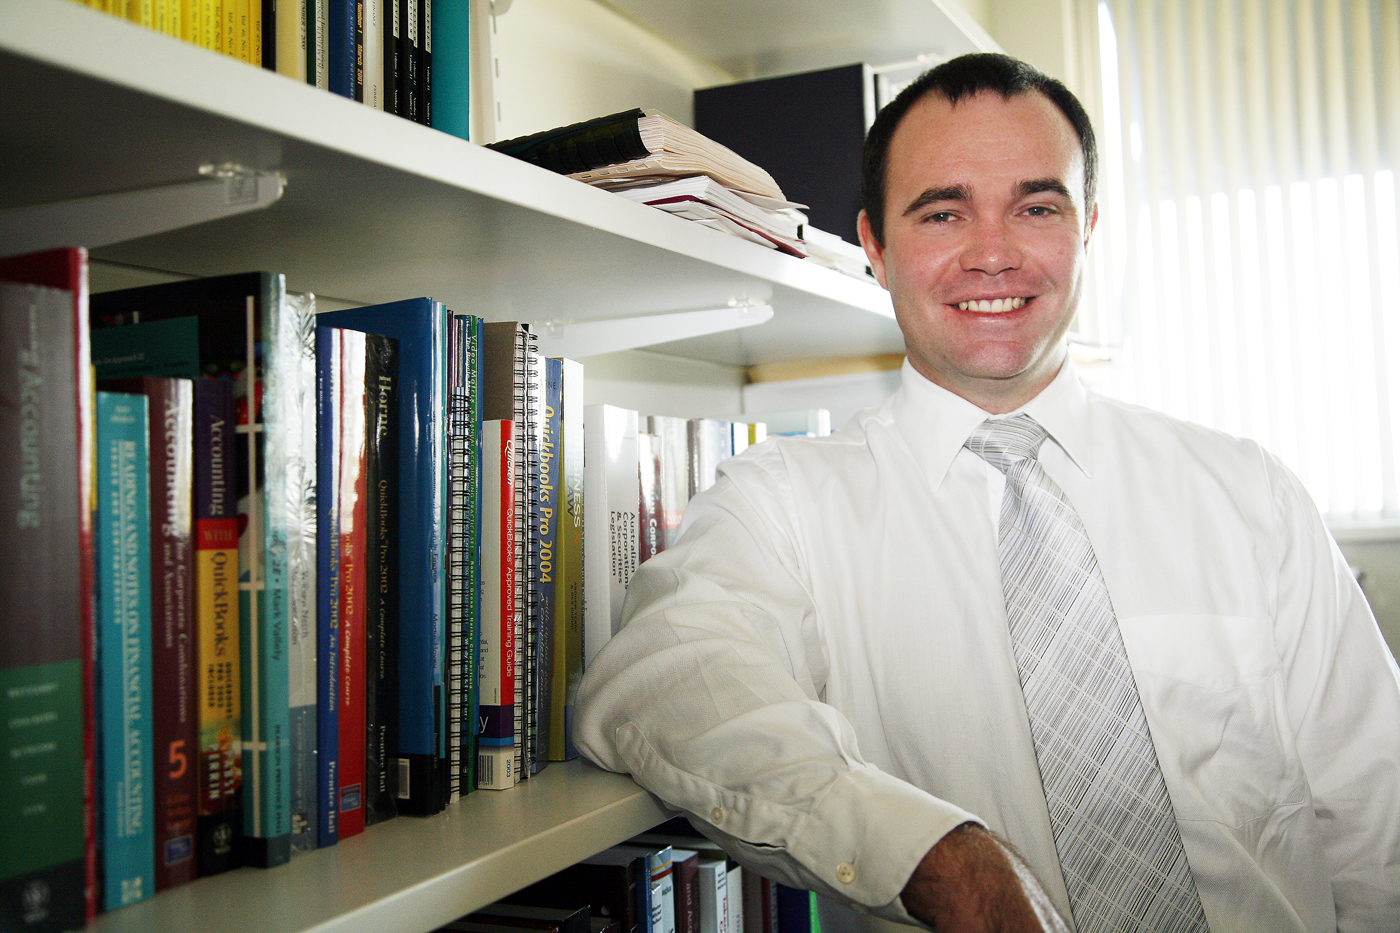 Mark Brimble, in shirt and tie, in office with arm on book shelf.